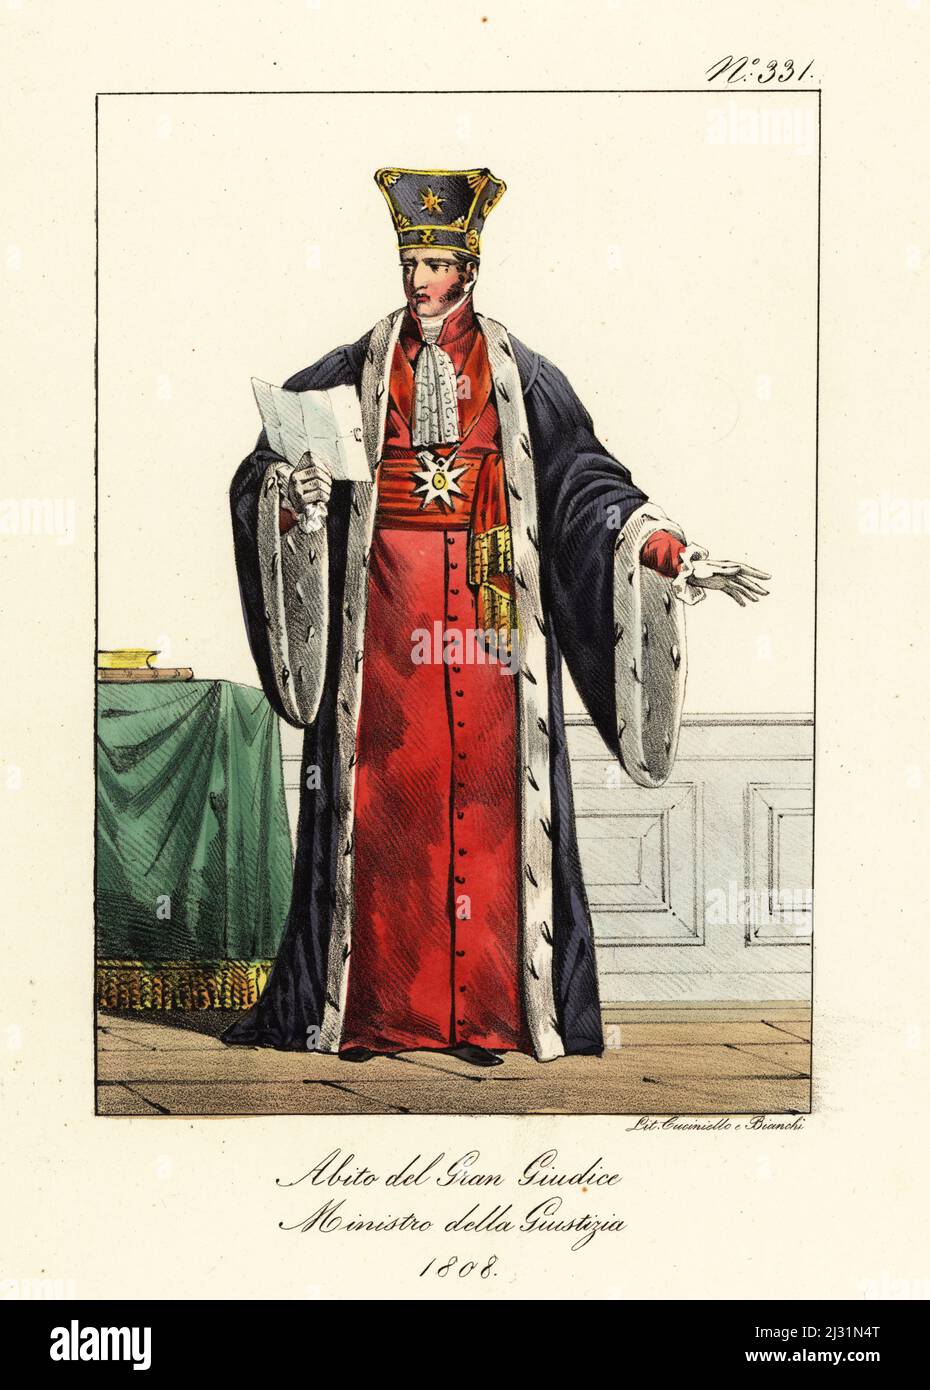 Costume of a French Chief Judge and Minister of Justice, during the First Empire, 1808. Based on a portrait of lawyer and politician Claude Ambroise Régnier, Duke of Massa, with the order of the Legion of Honour. Costume du Grand Juge. Ministre de la Justice. Handcoloured lithograph by Lorenzo Bianchi and Domenico Cuciniello after Hippolyte Lecomte from Costumi civili e militari della monarchia francese dal 1200 al 1820, Naples, 1825. Italian edition of Lecomte’s Civilian and military costumes of the French monarchy from 1200 to 1820. Stock Photo